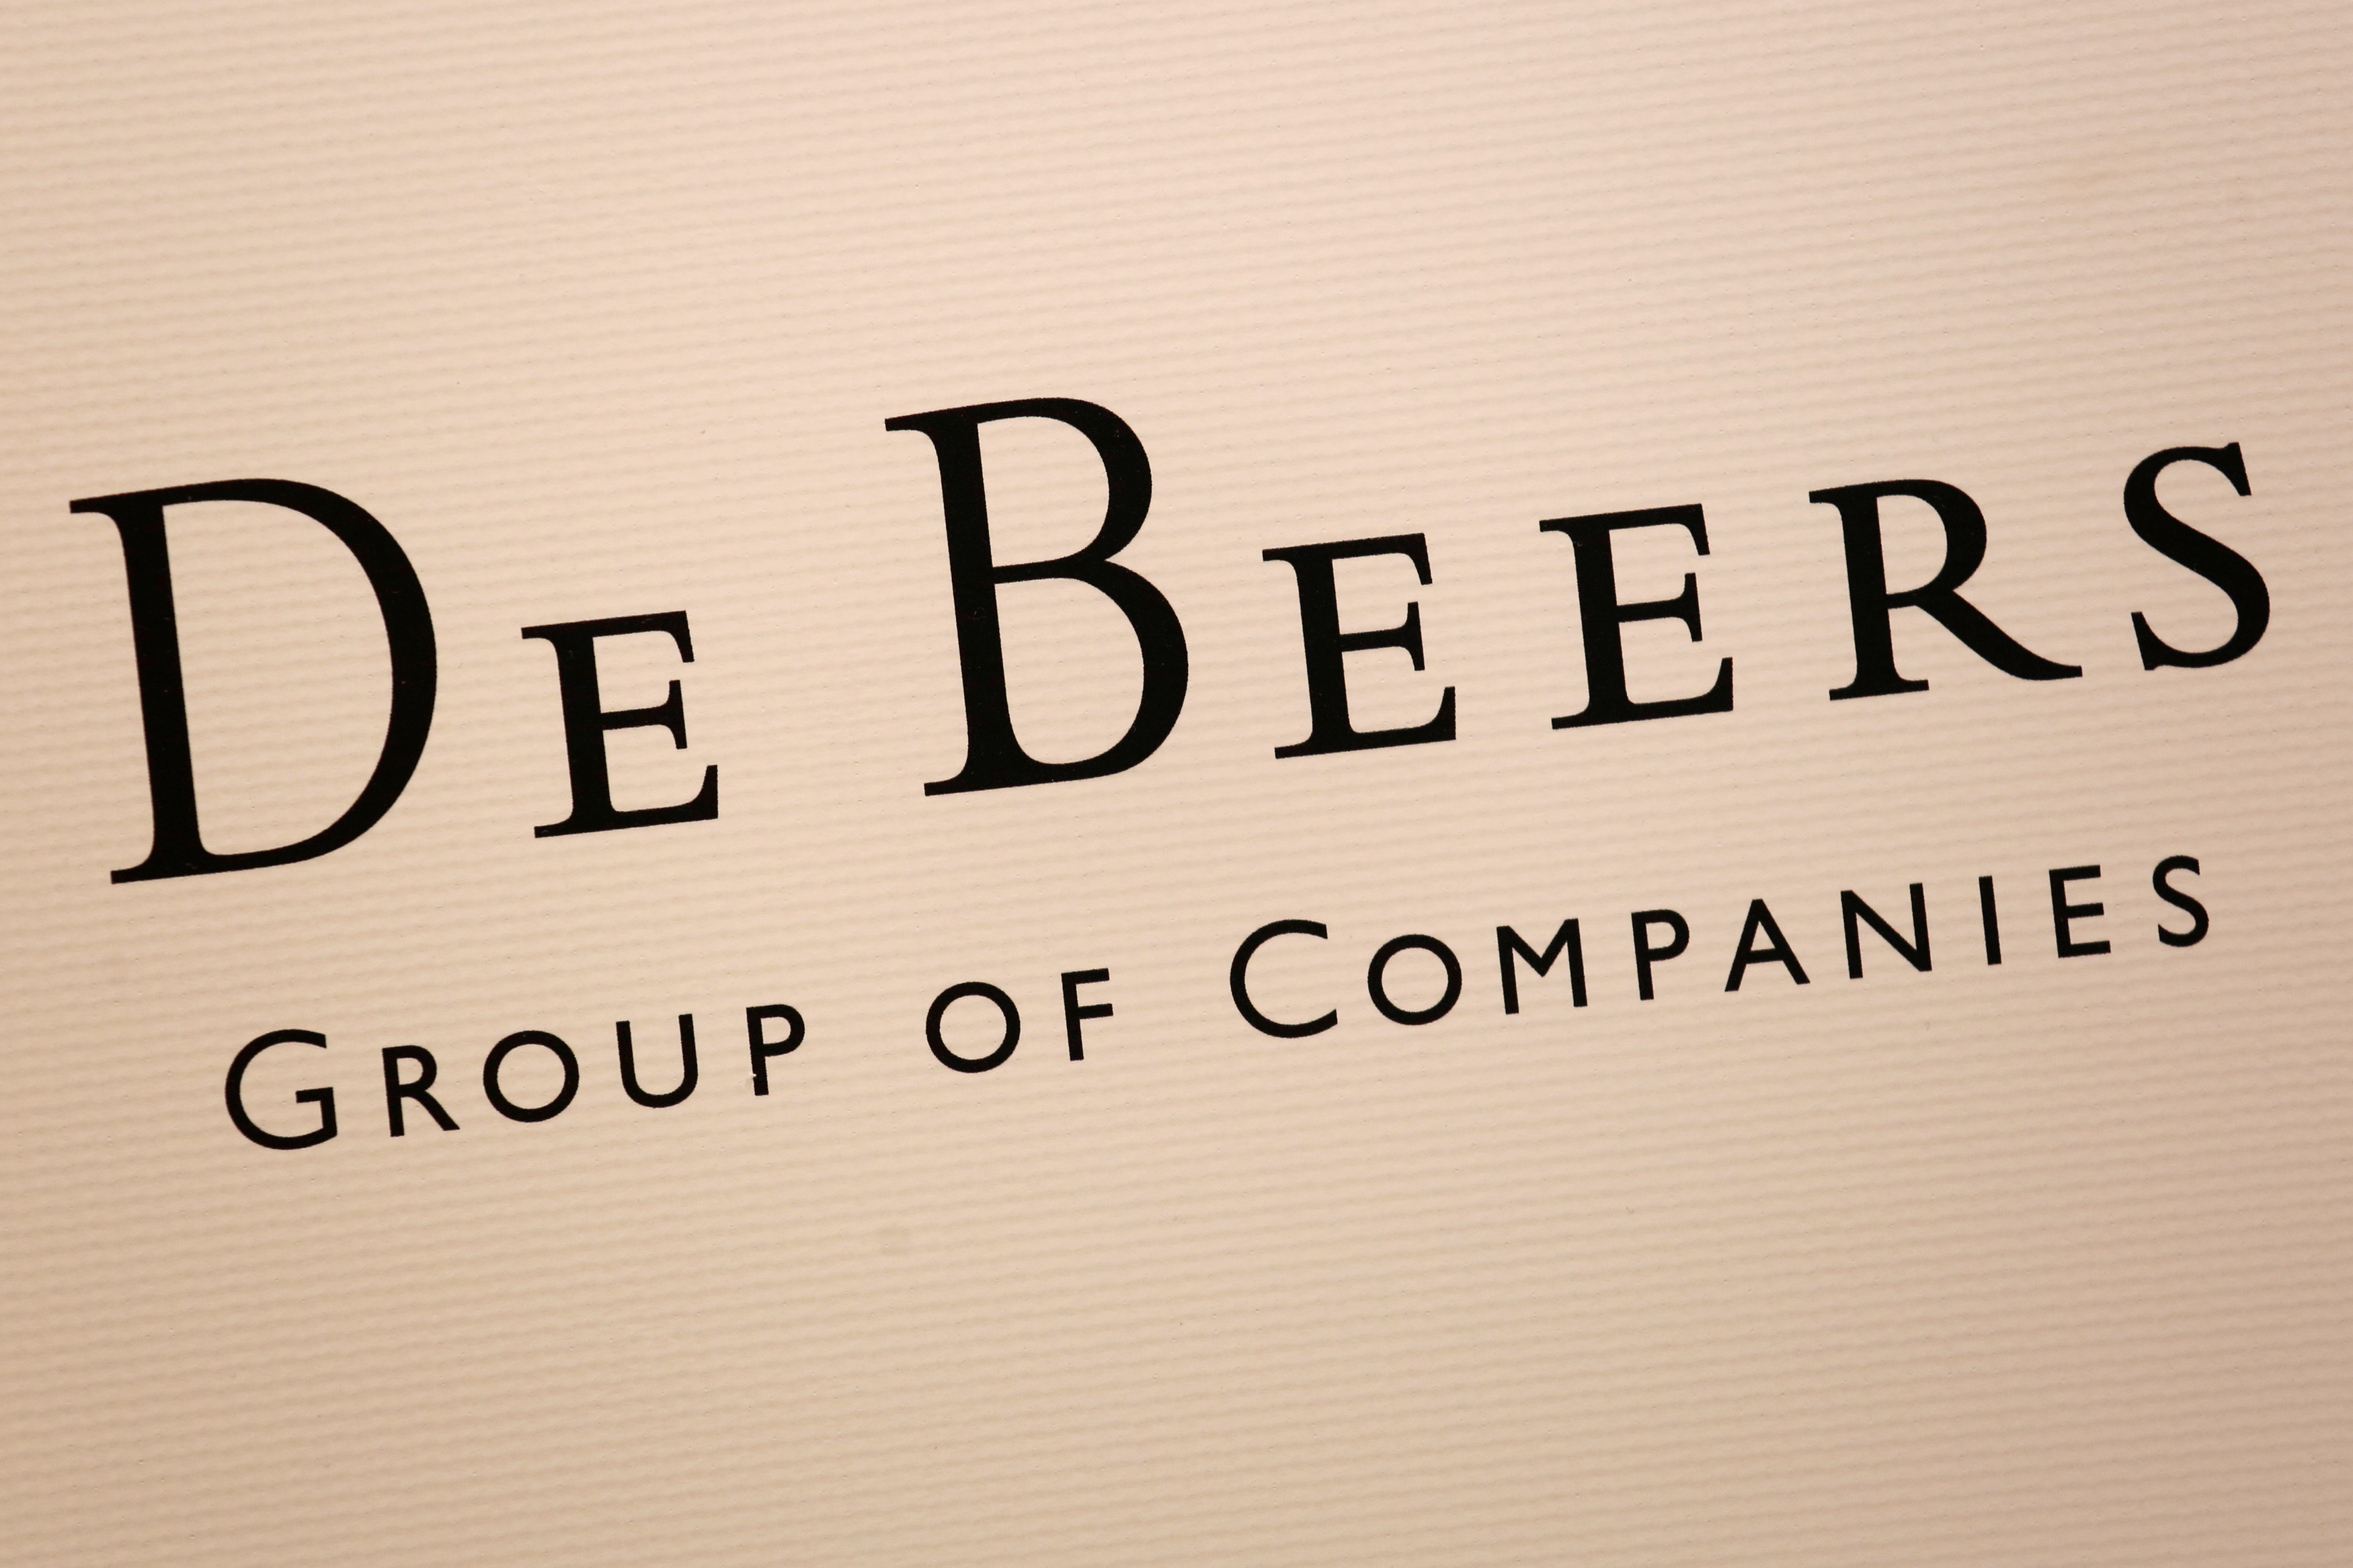 De Beers Group Statement Following United States Executive Order